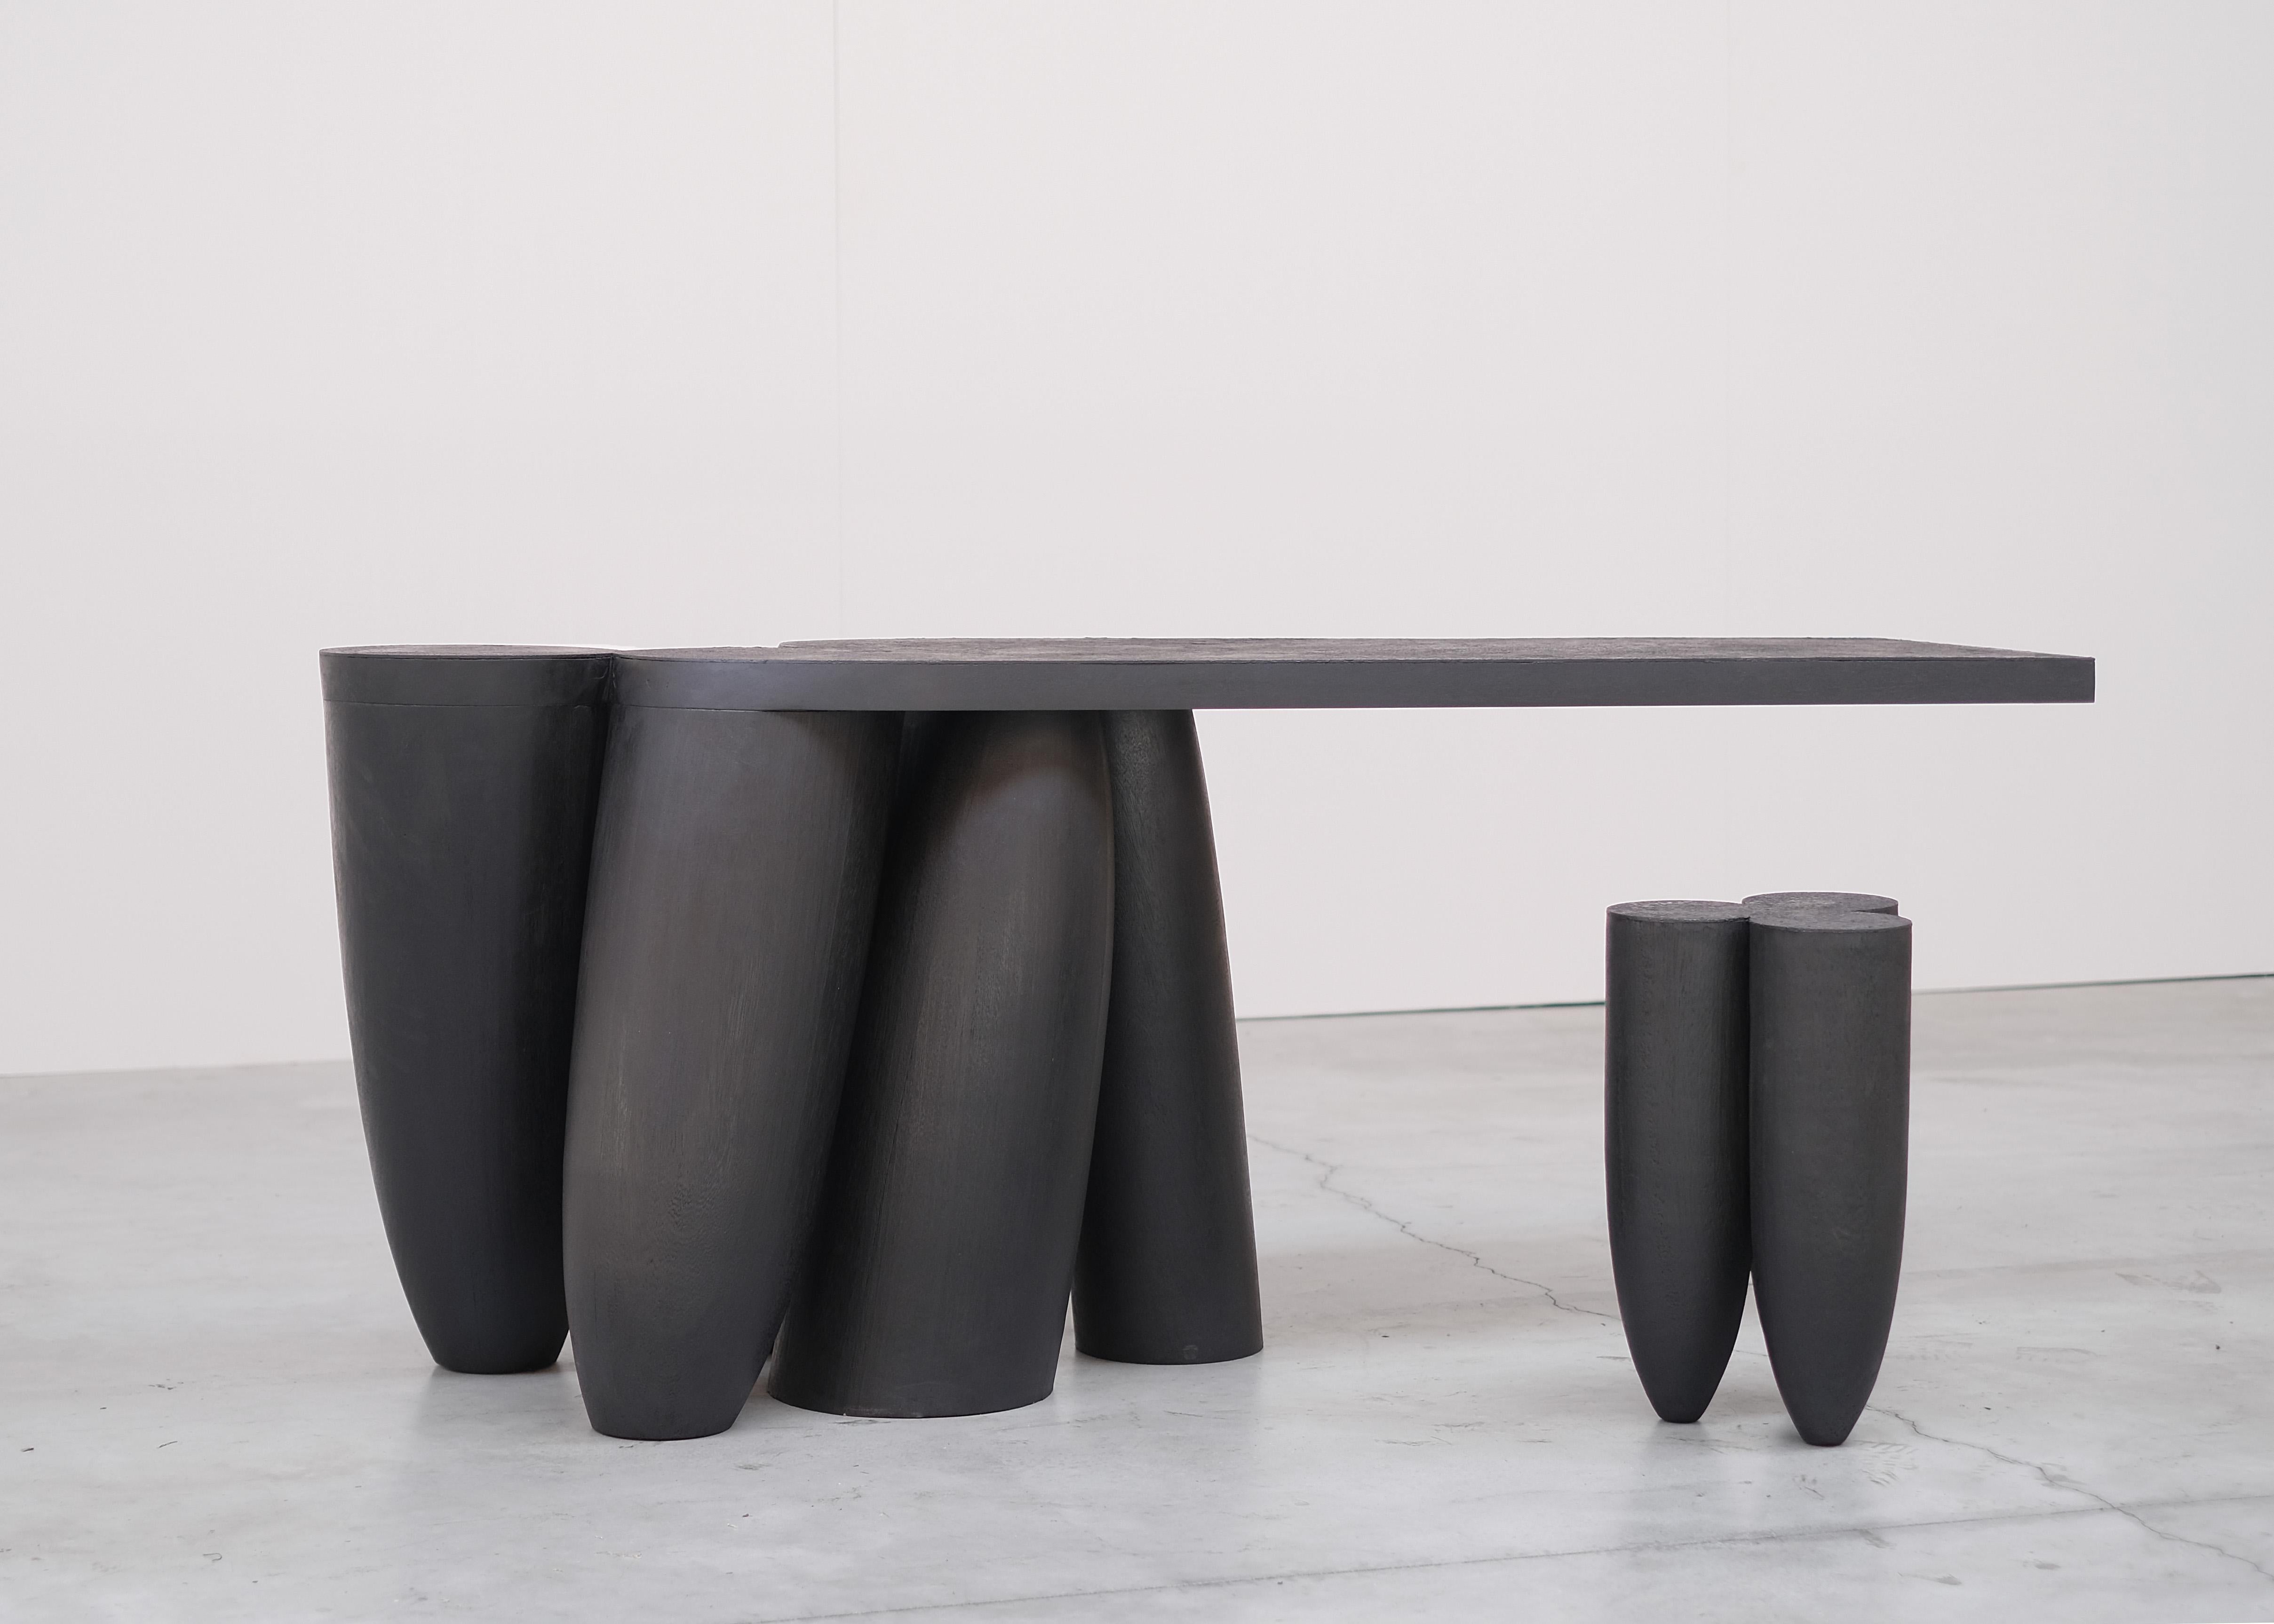 Four legged Senufo coffee table by Arno Declercq
Dimensions: D 51 x W 180 x H 73 cm.
Materials: Wood

Signed by Arno Declercq

Arno Declercq
Belgian designer and art dealer who makes bespoke objects with passion for design, atmosphere,